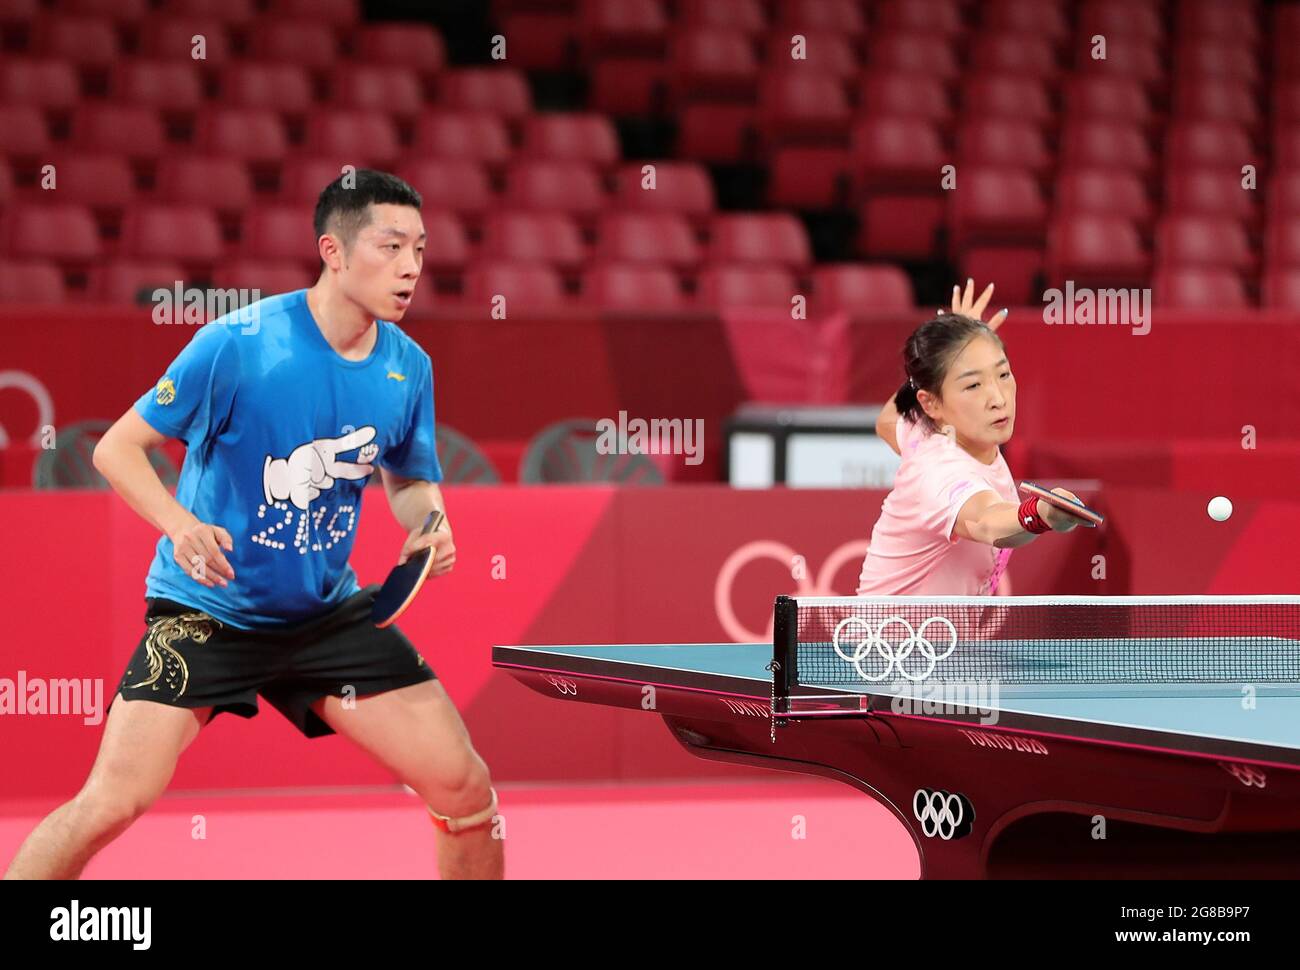 CHINESE TABLE TENNIS PLAYERS LIU GUOLIANG AND KONG LINGHUI RECEIVE MASSAGE  DURING TRAINING SESSION IN SHIJIAZHUANG. Chinese table tennis players Liu  Guoliang (L) and Kong Linghui (R) receive massage during a practice